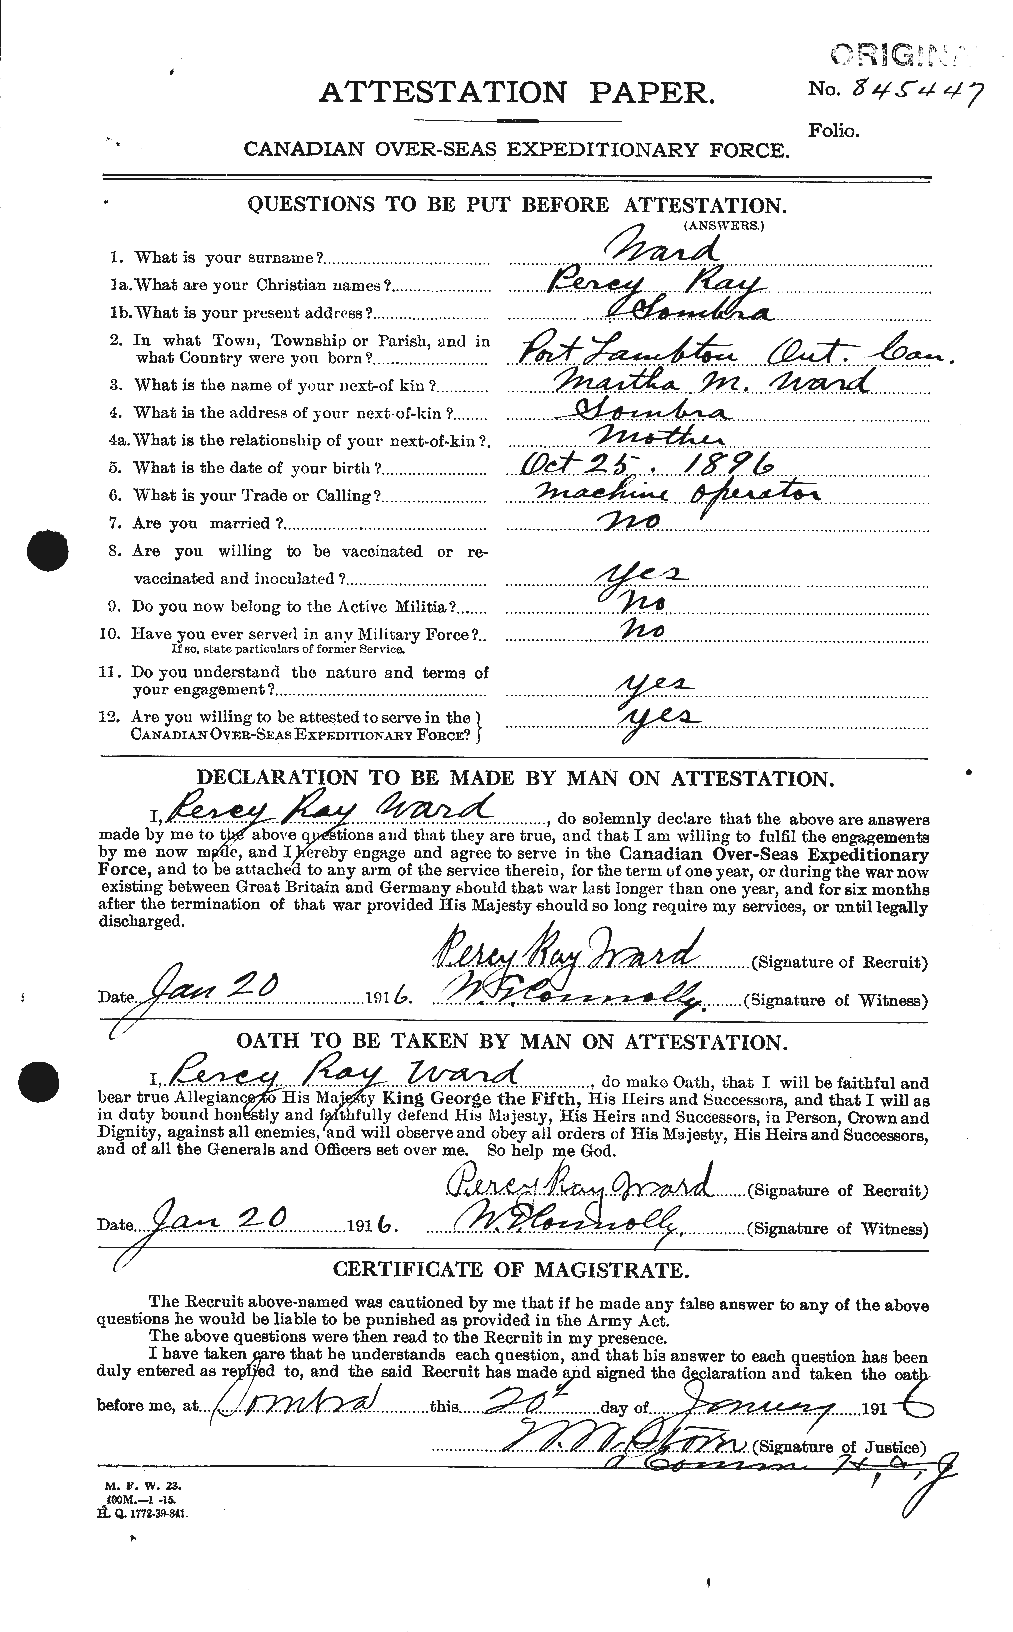 Personnel Records of the First World War - CEF 659626a